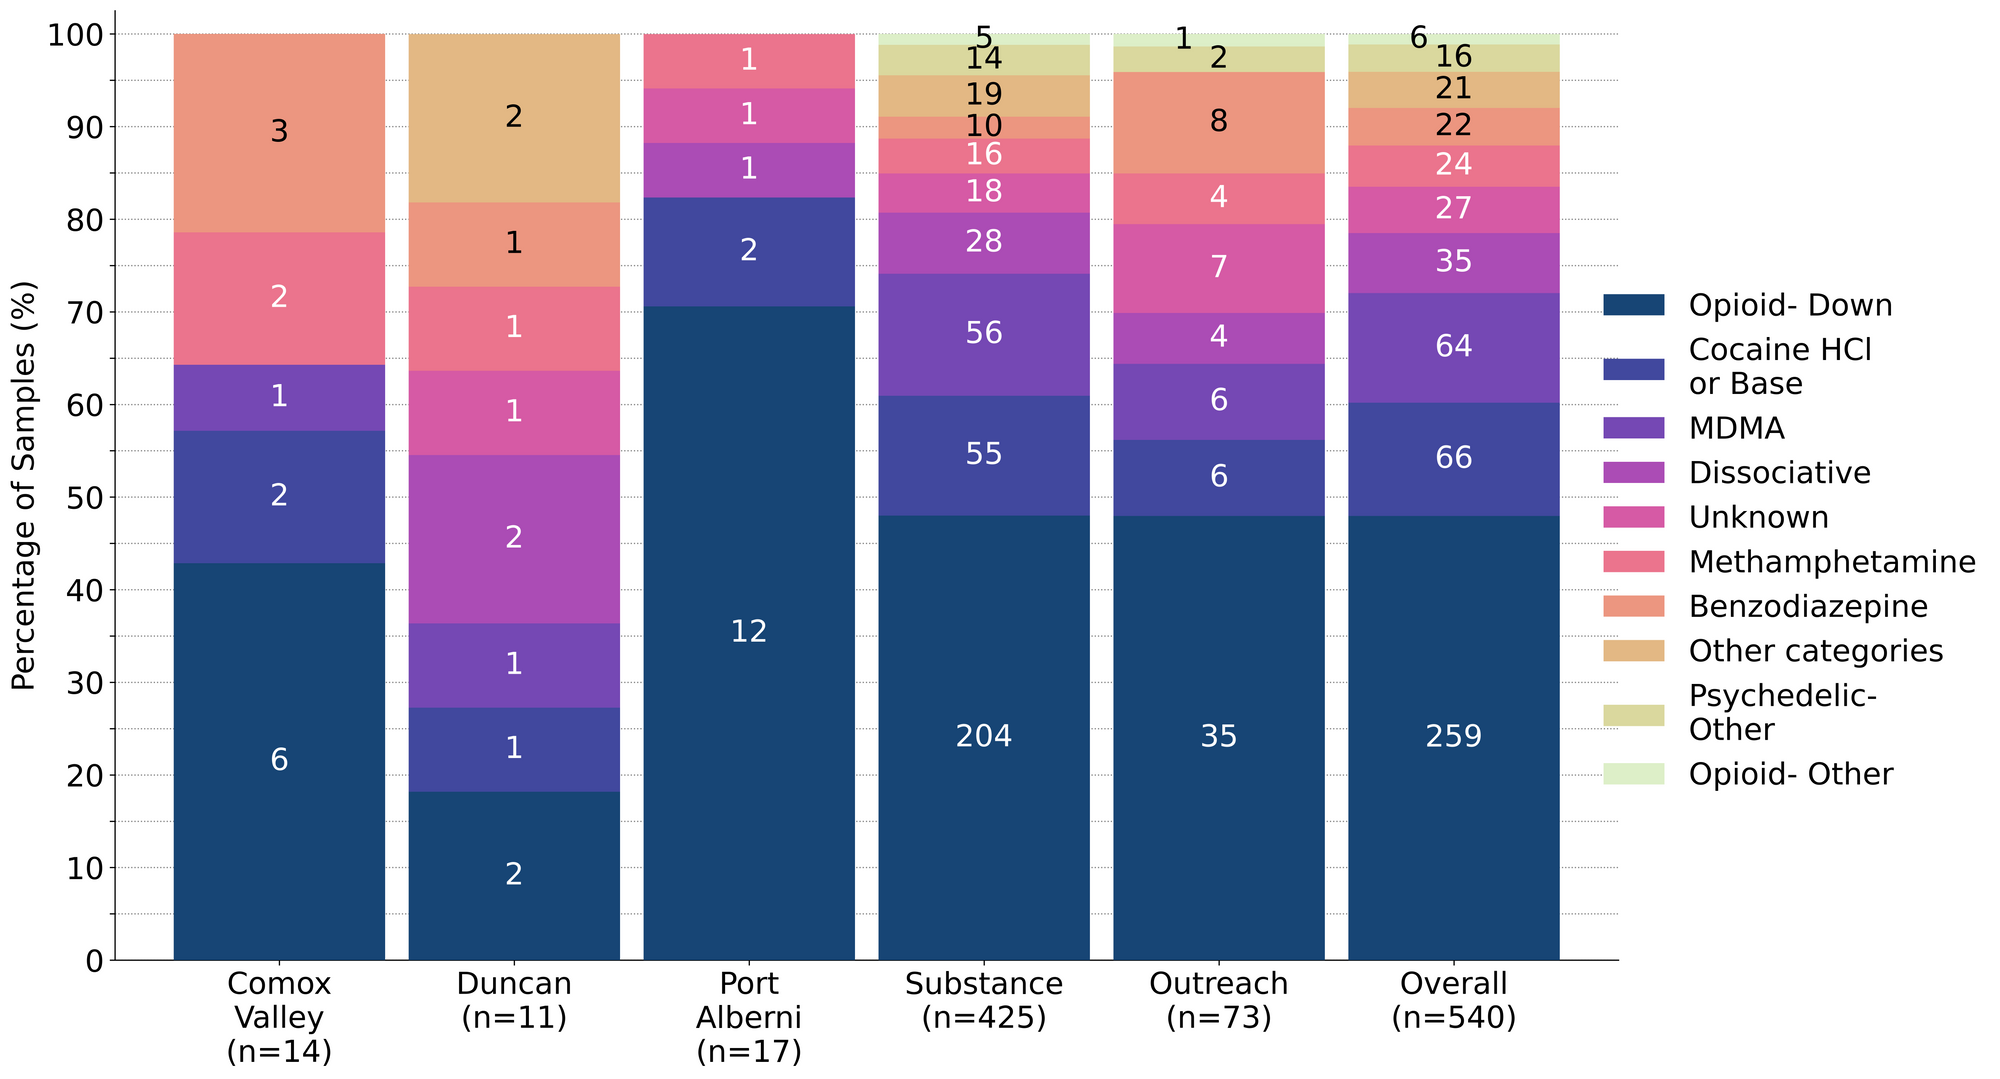 Figure 1. Prevalence of drug classes checked during December, split by sample collection/method. Bars are stacked by percentage of samples in each drug class, with the individual sample counts overlaid.